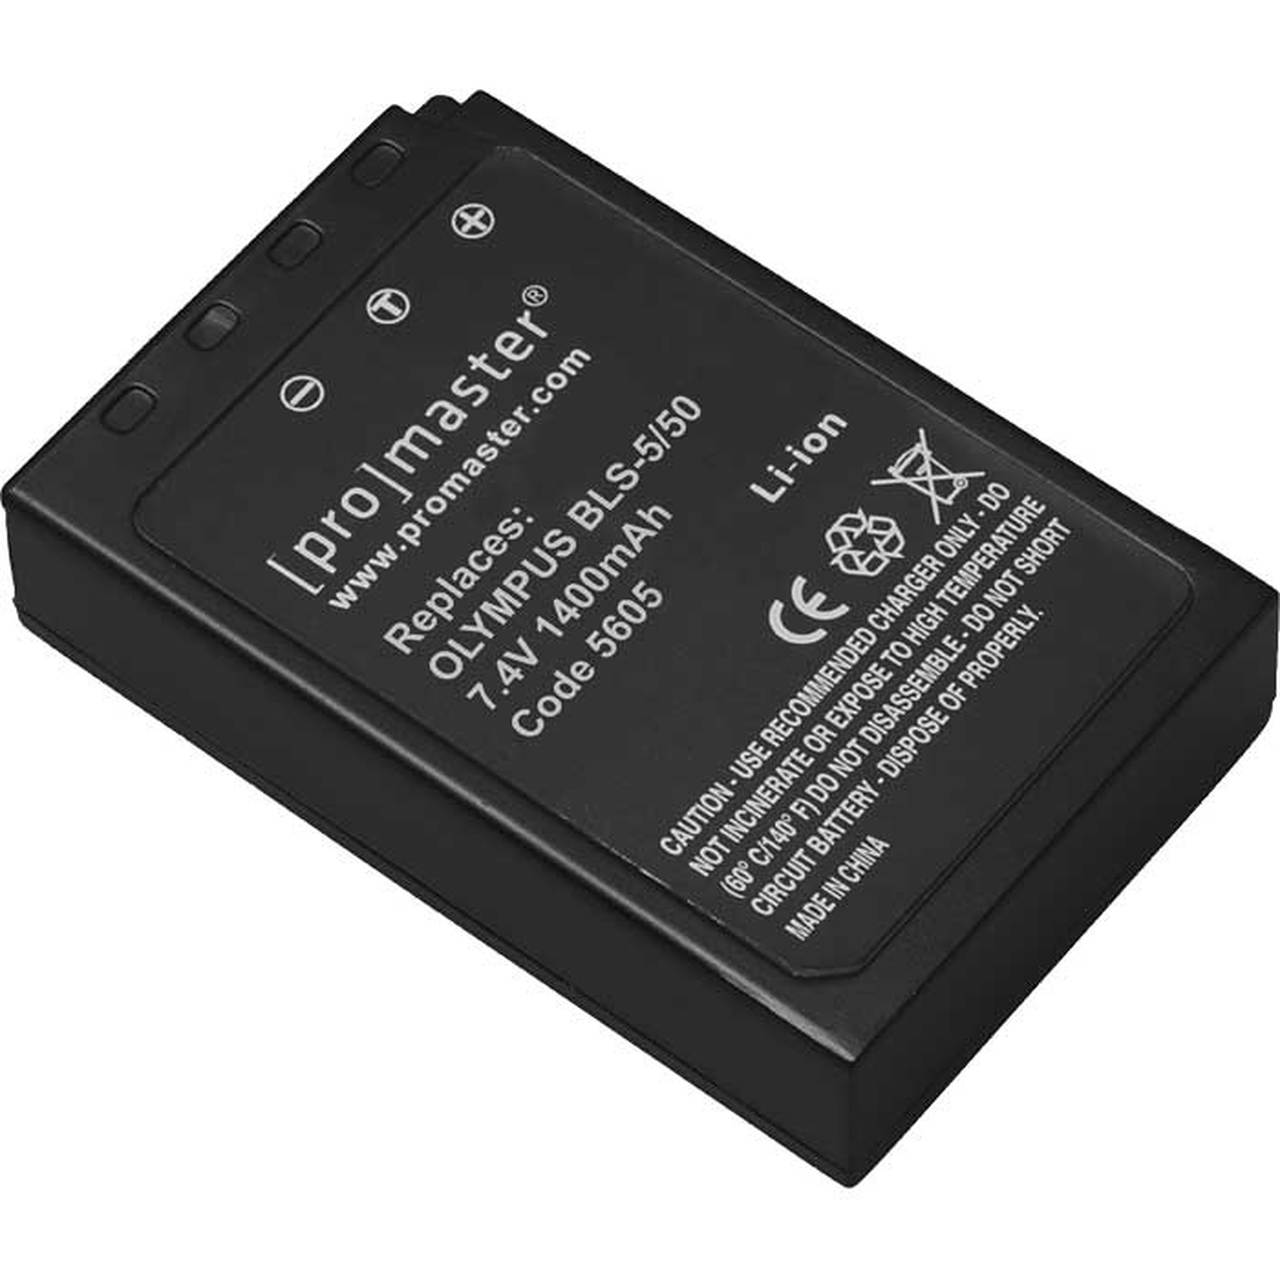 Promaster 5605 BLS-5/BLS-50 Battery for Olympus